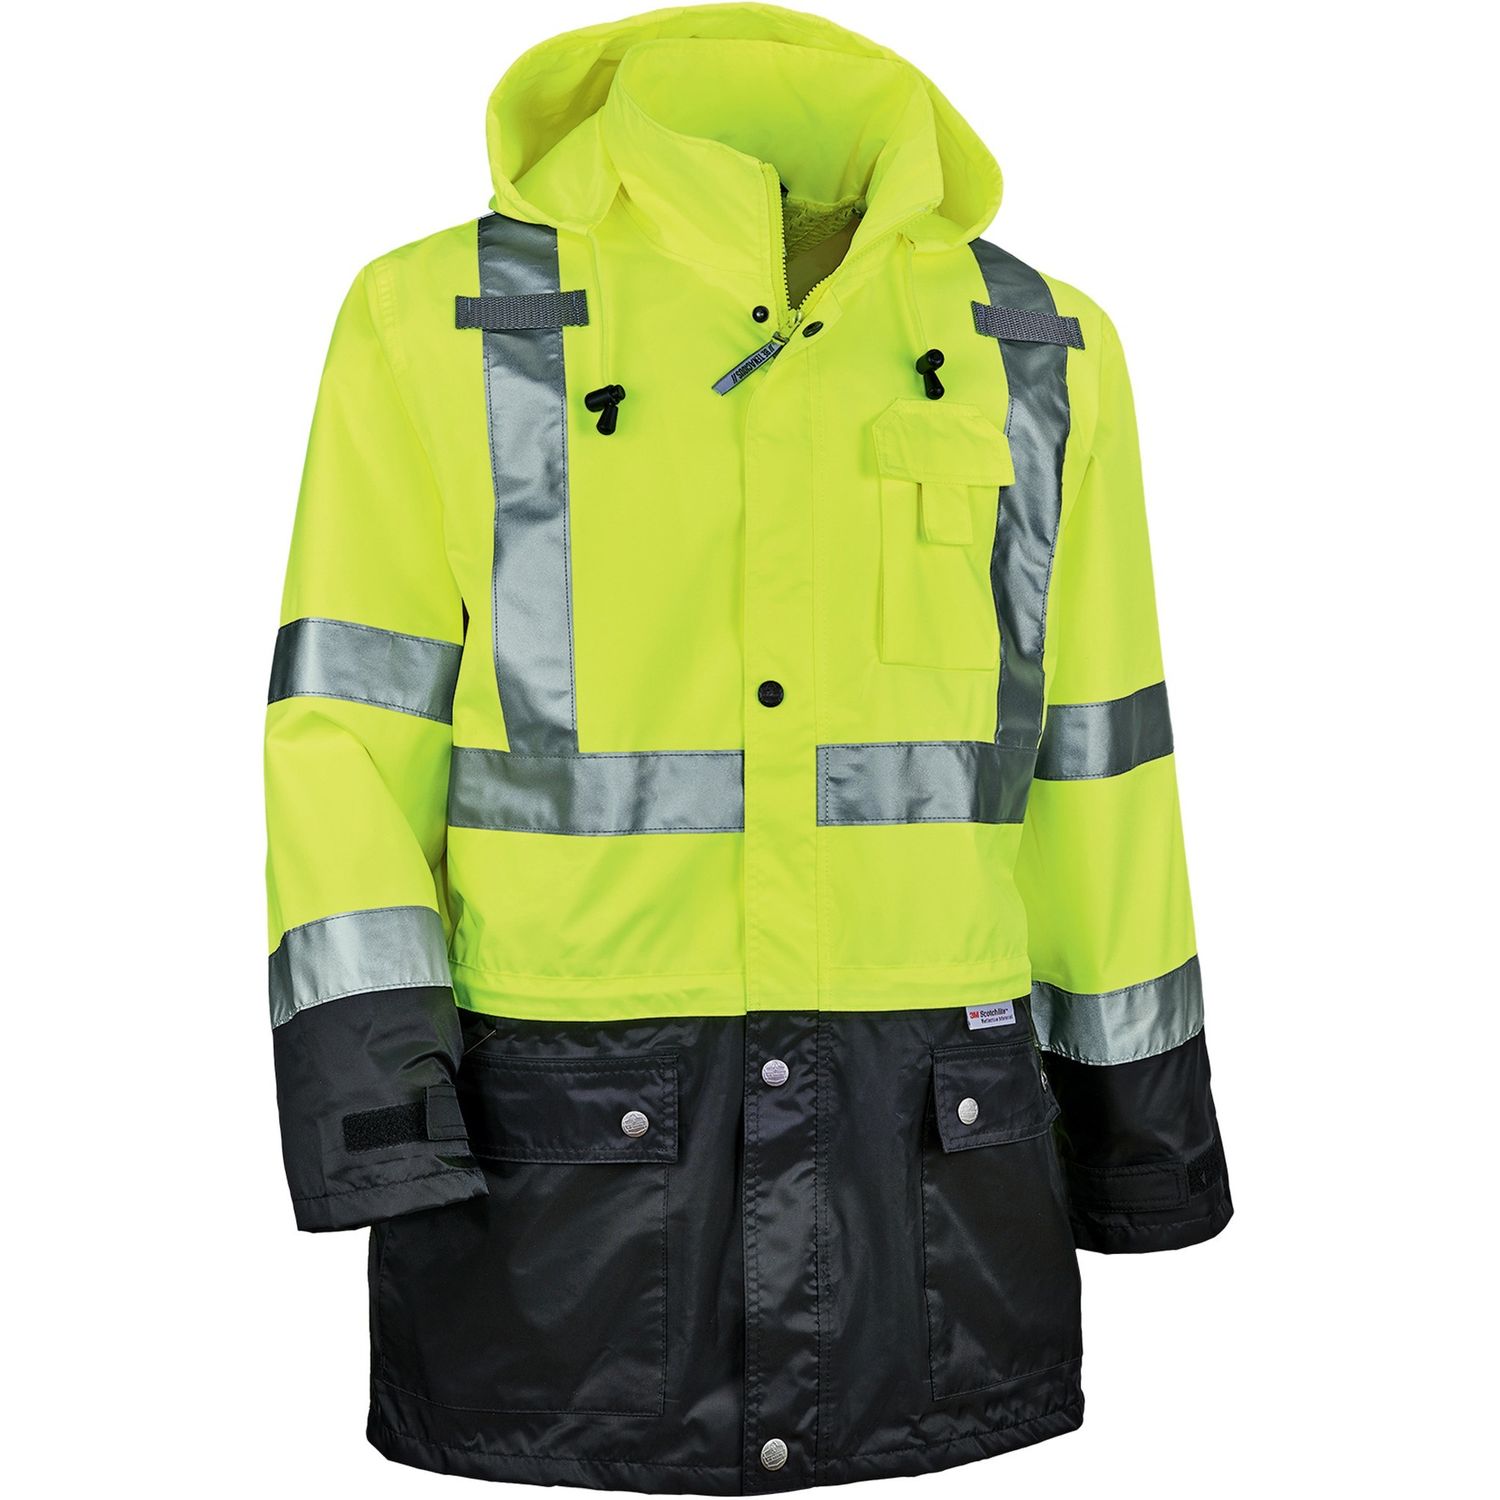 8365BK Type R Class 3 Front Rain Jacket Recommended for: Construction, Utility, Emergency, Cell Phone, Airline Crew, Railway Worker, Survey Crew